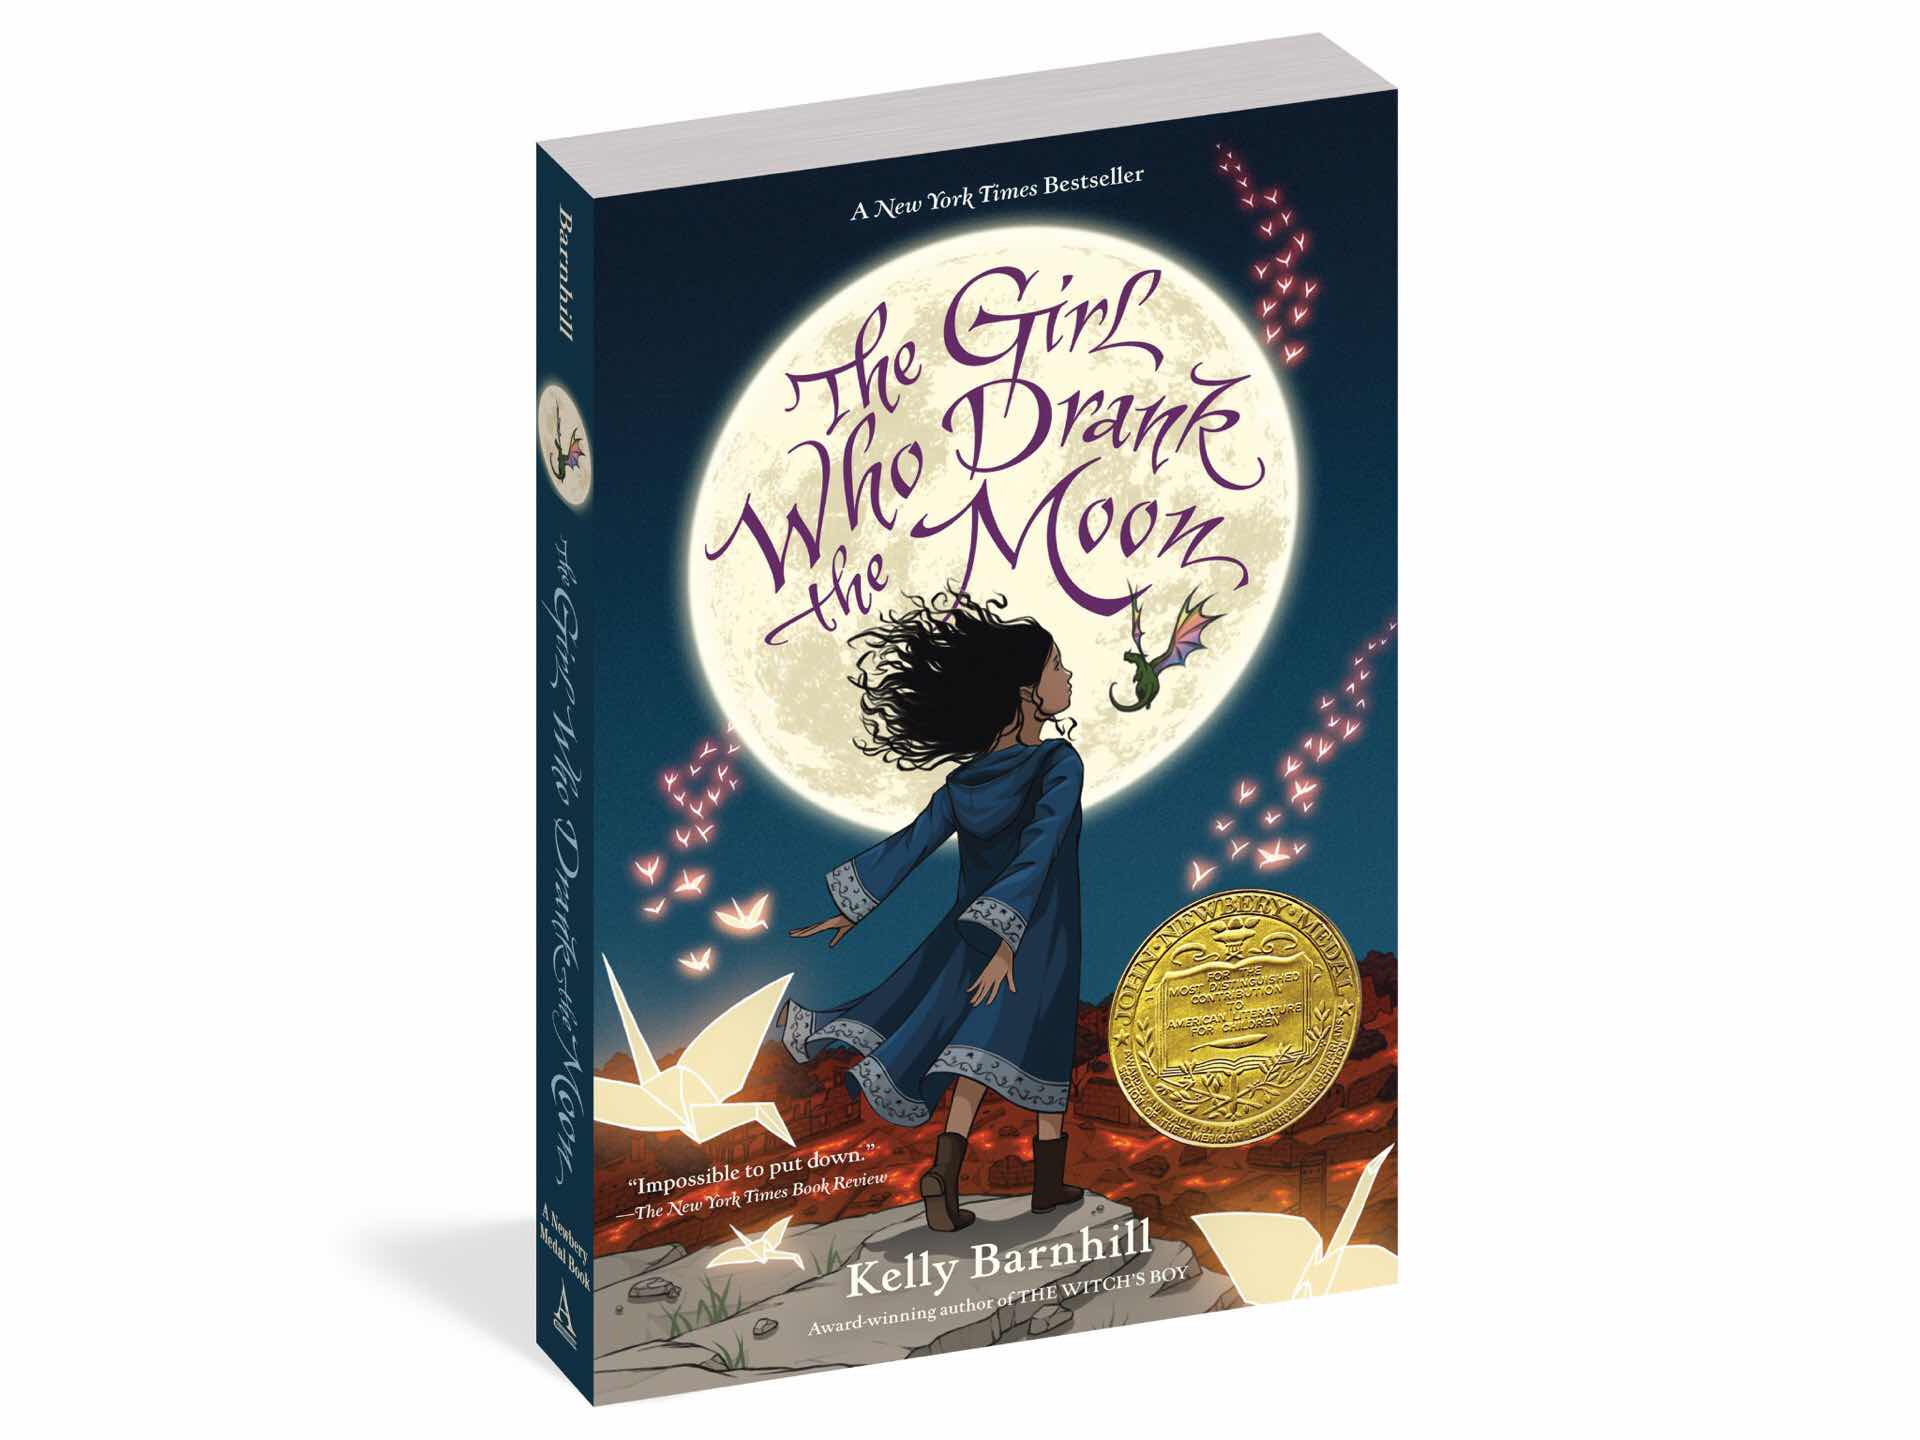 The Girl Who Drank the Moon by Kelly Barnhill.